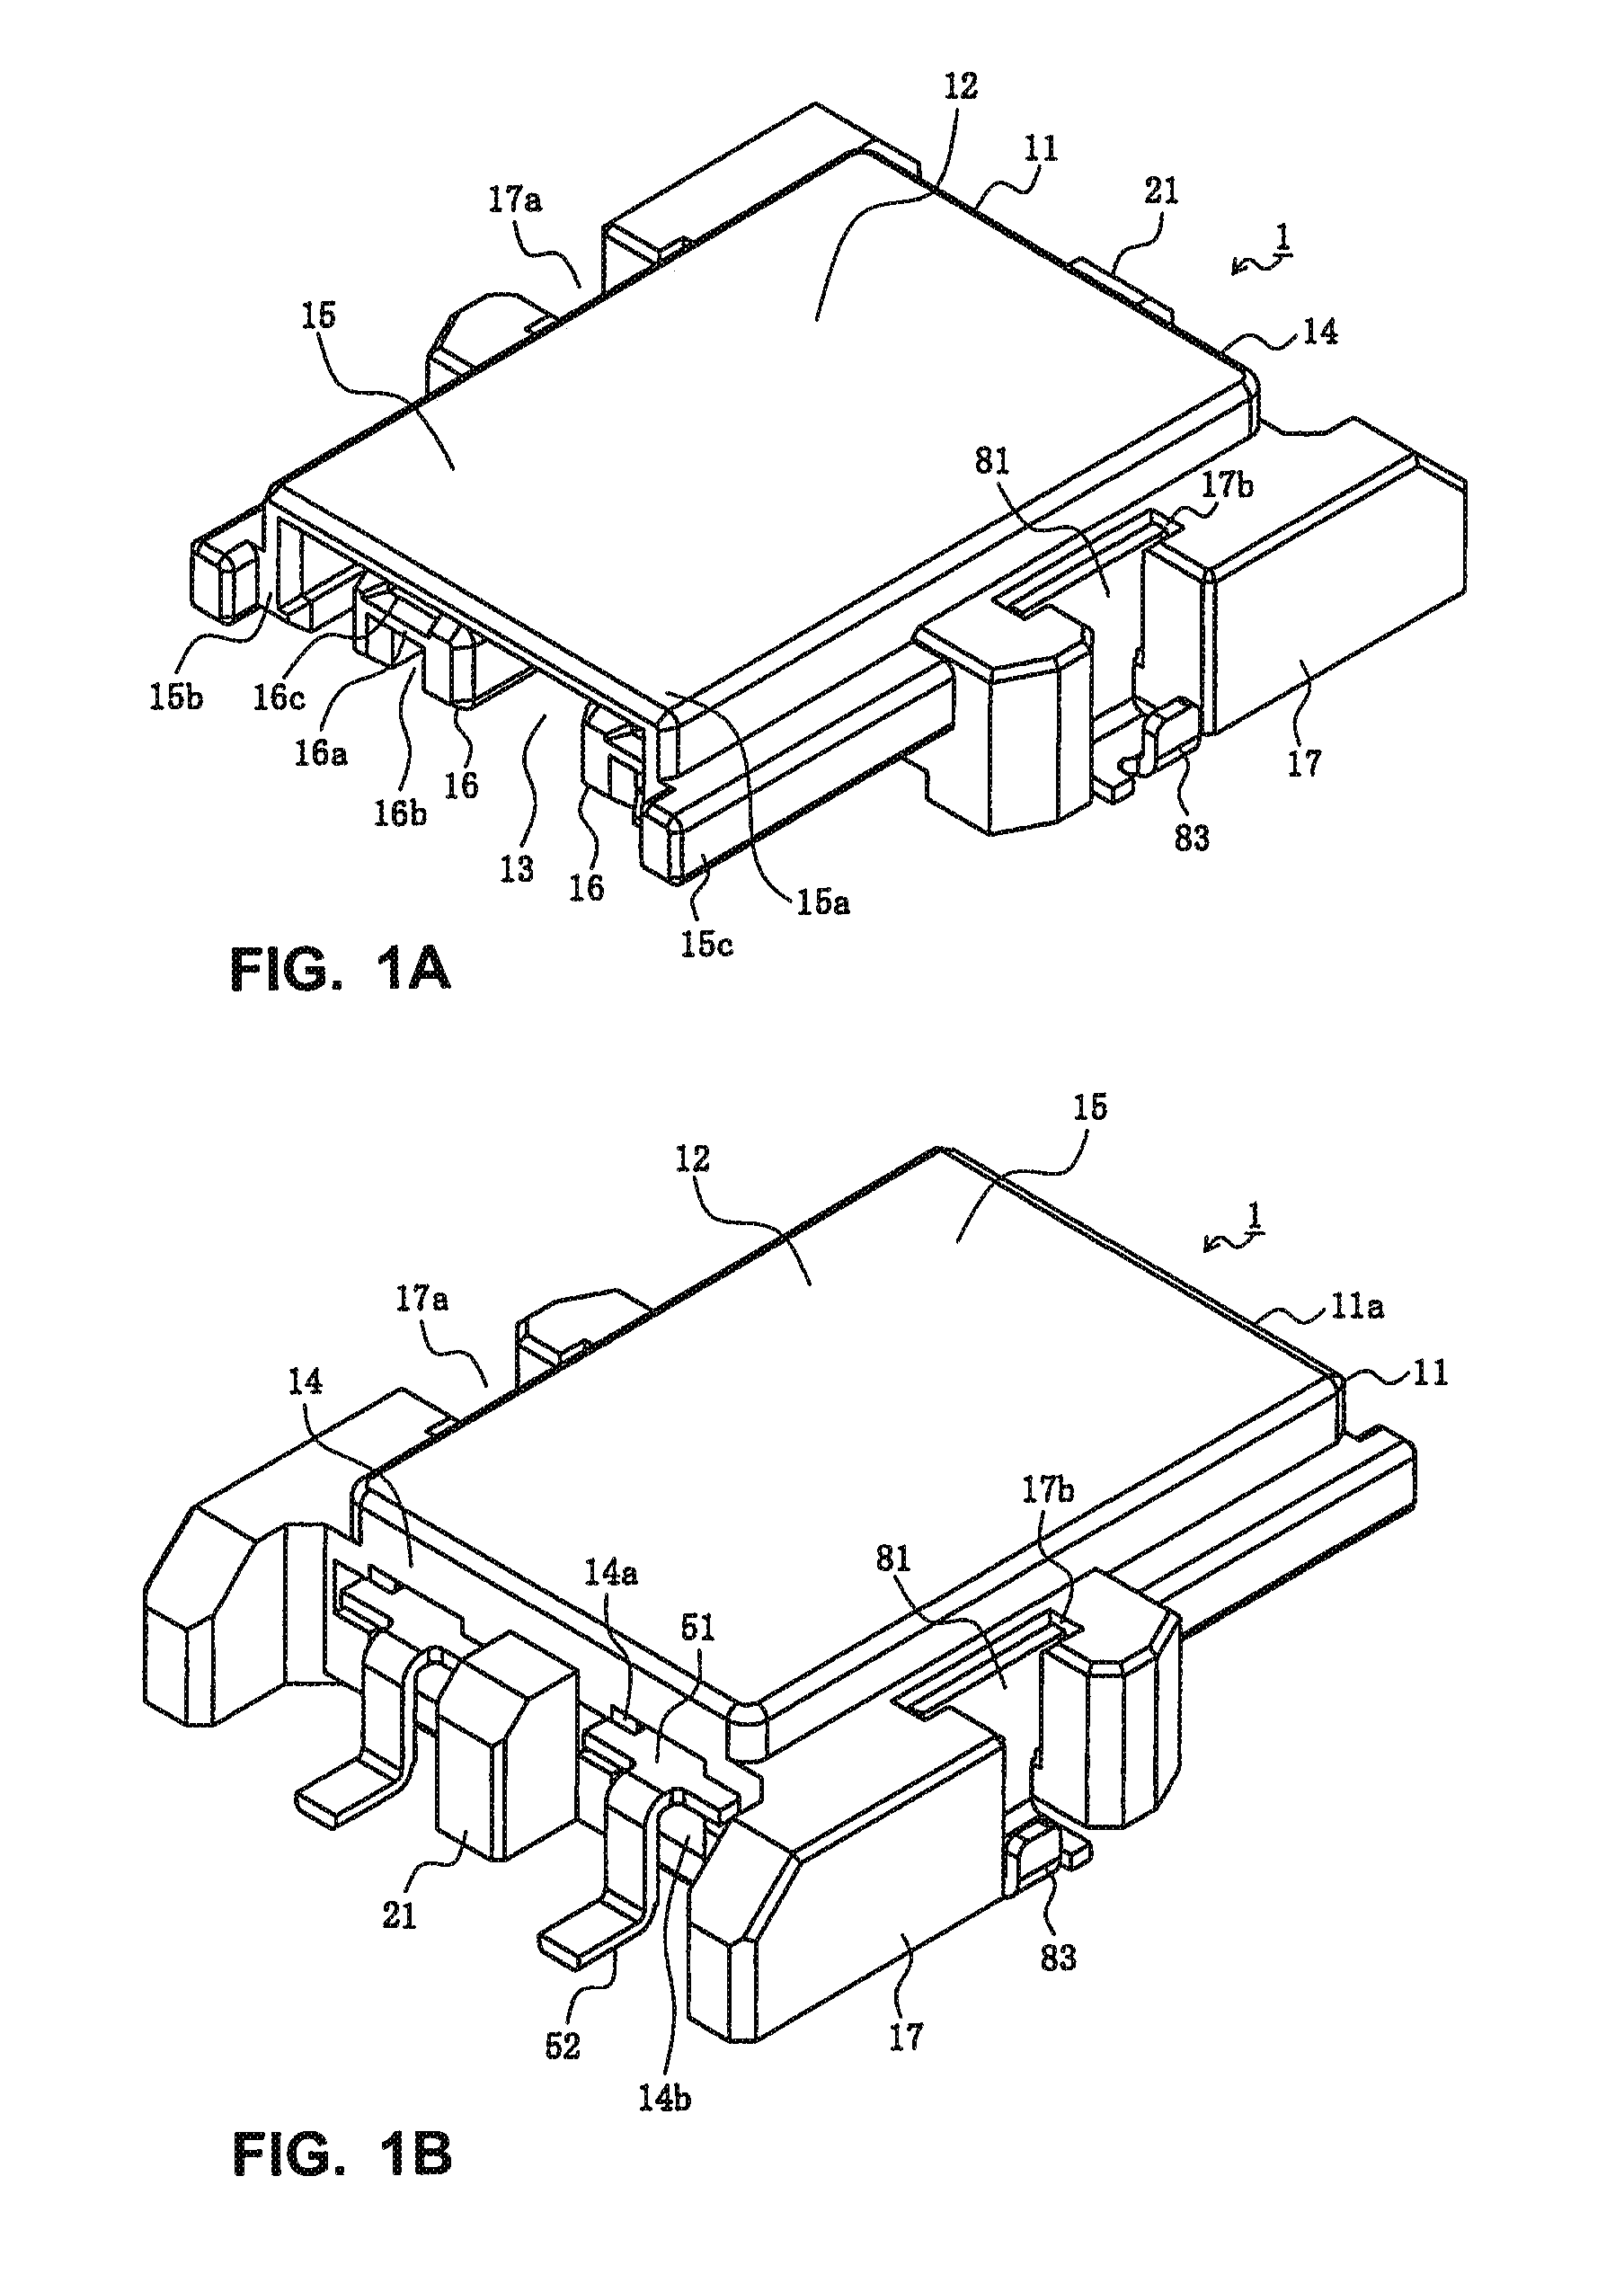 Loop connector and closed-circuit forming connector